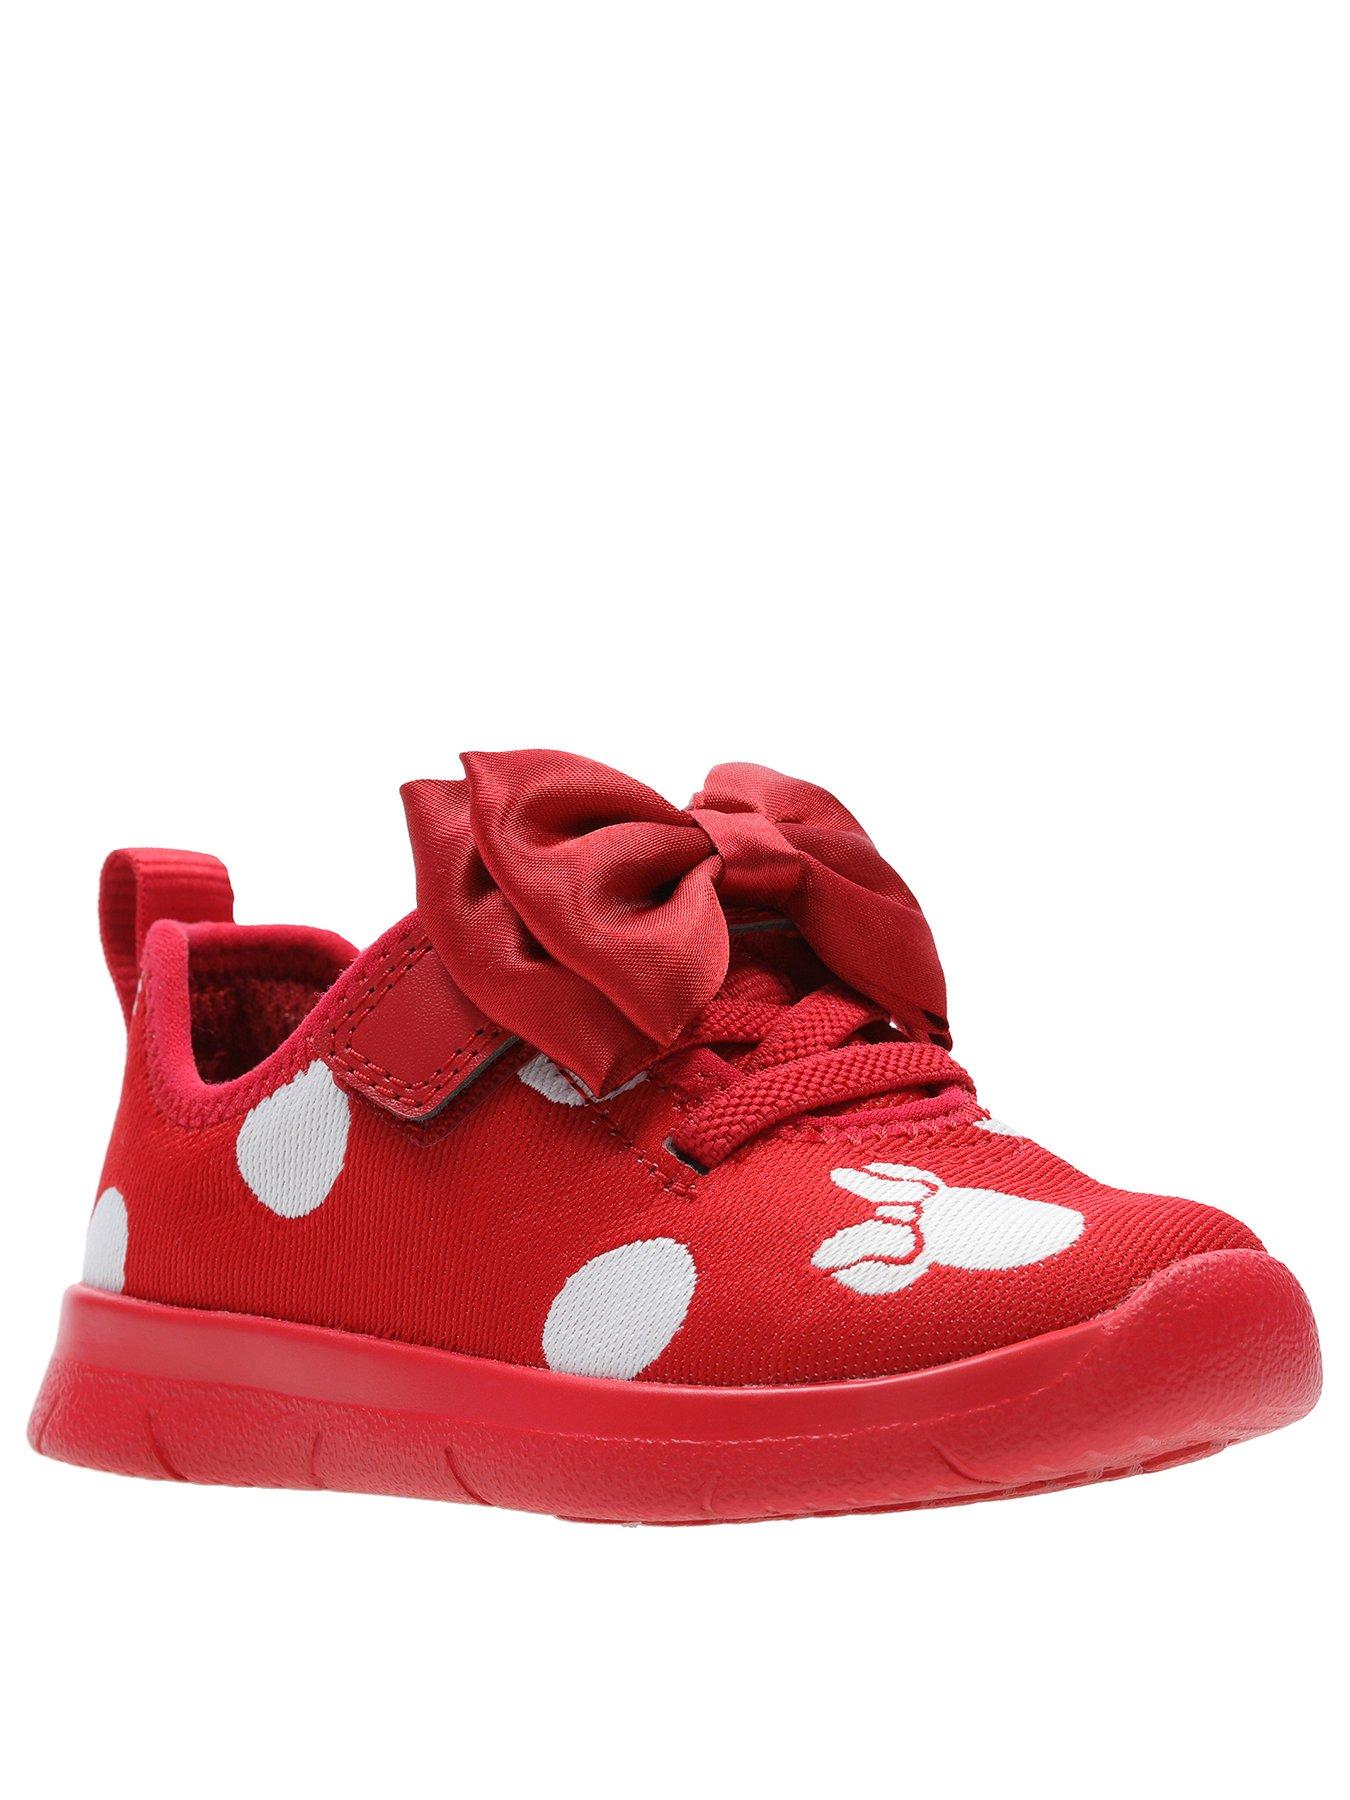 clarks minnie mouse